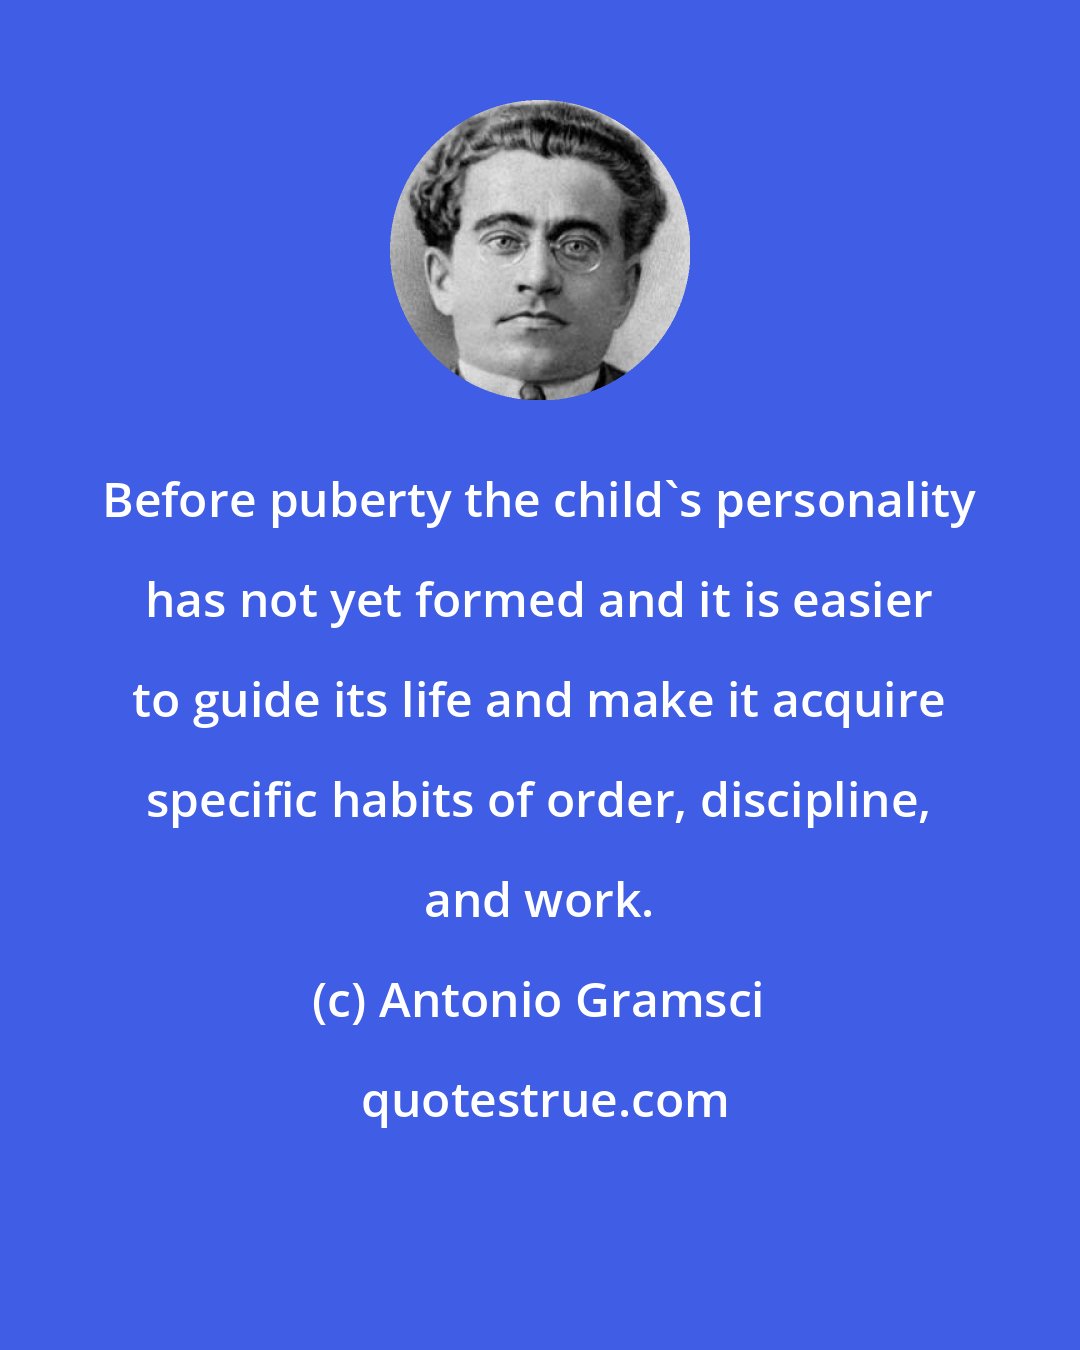 Antonio Gramsci: Before puberty the child's personality has not yet formed and it is easier to guide its life and make it acquire specific habits of order, discipline, and work.